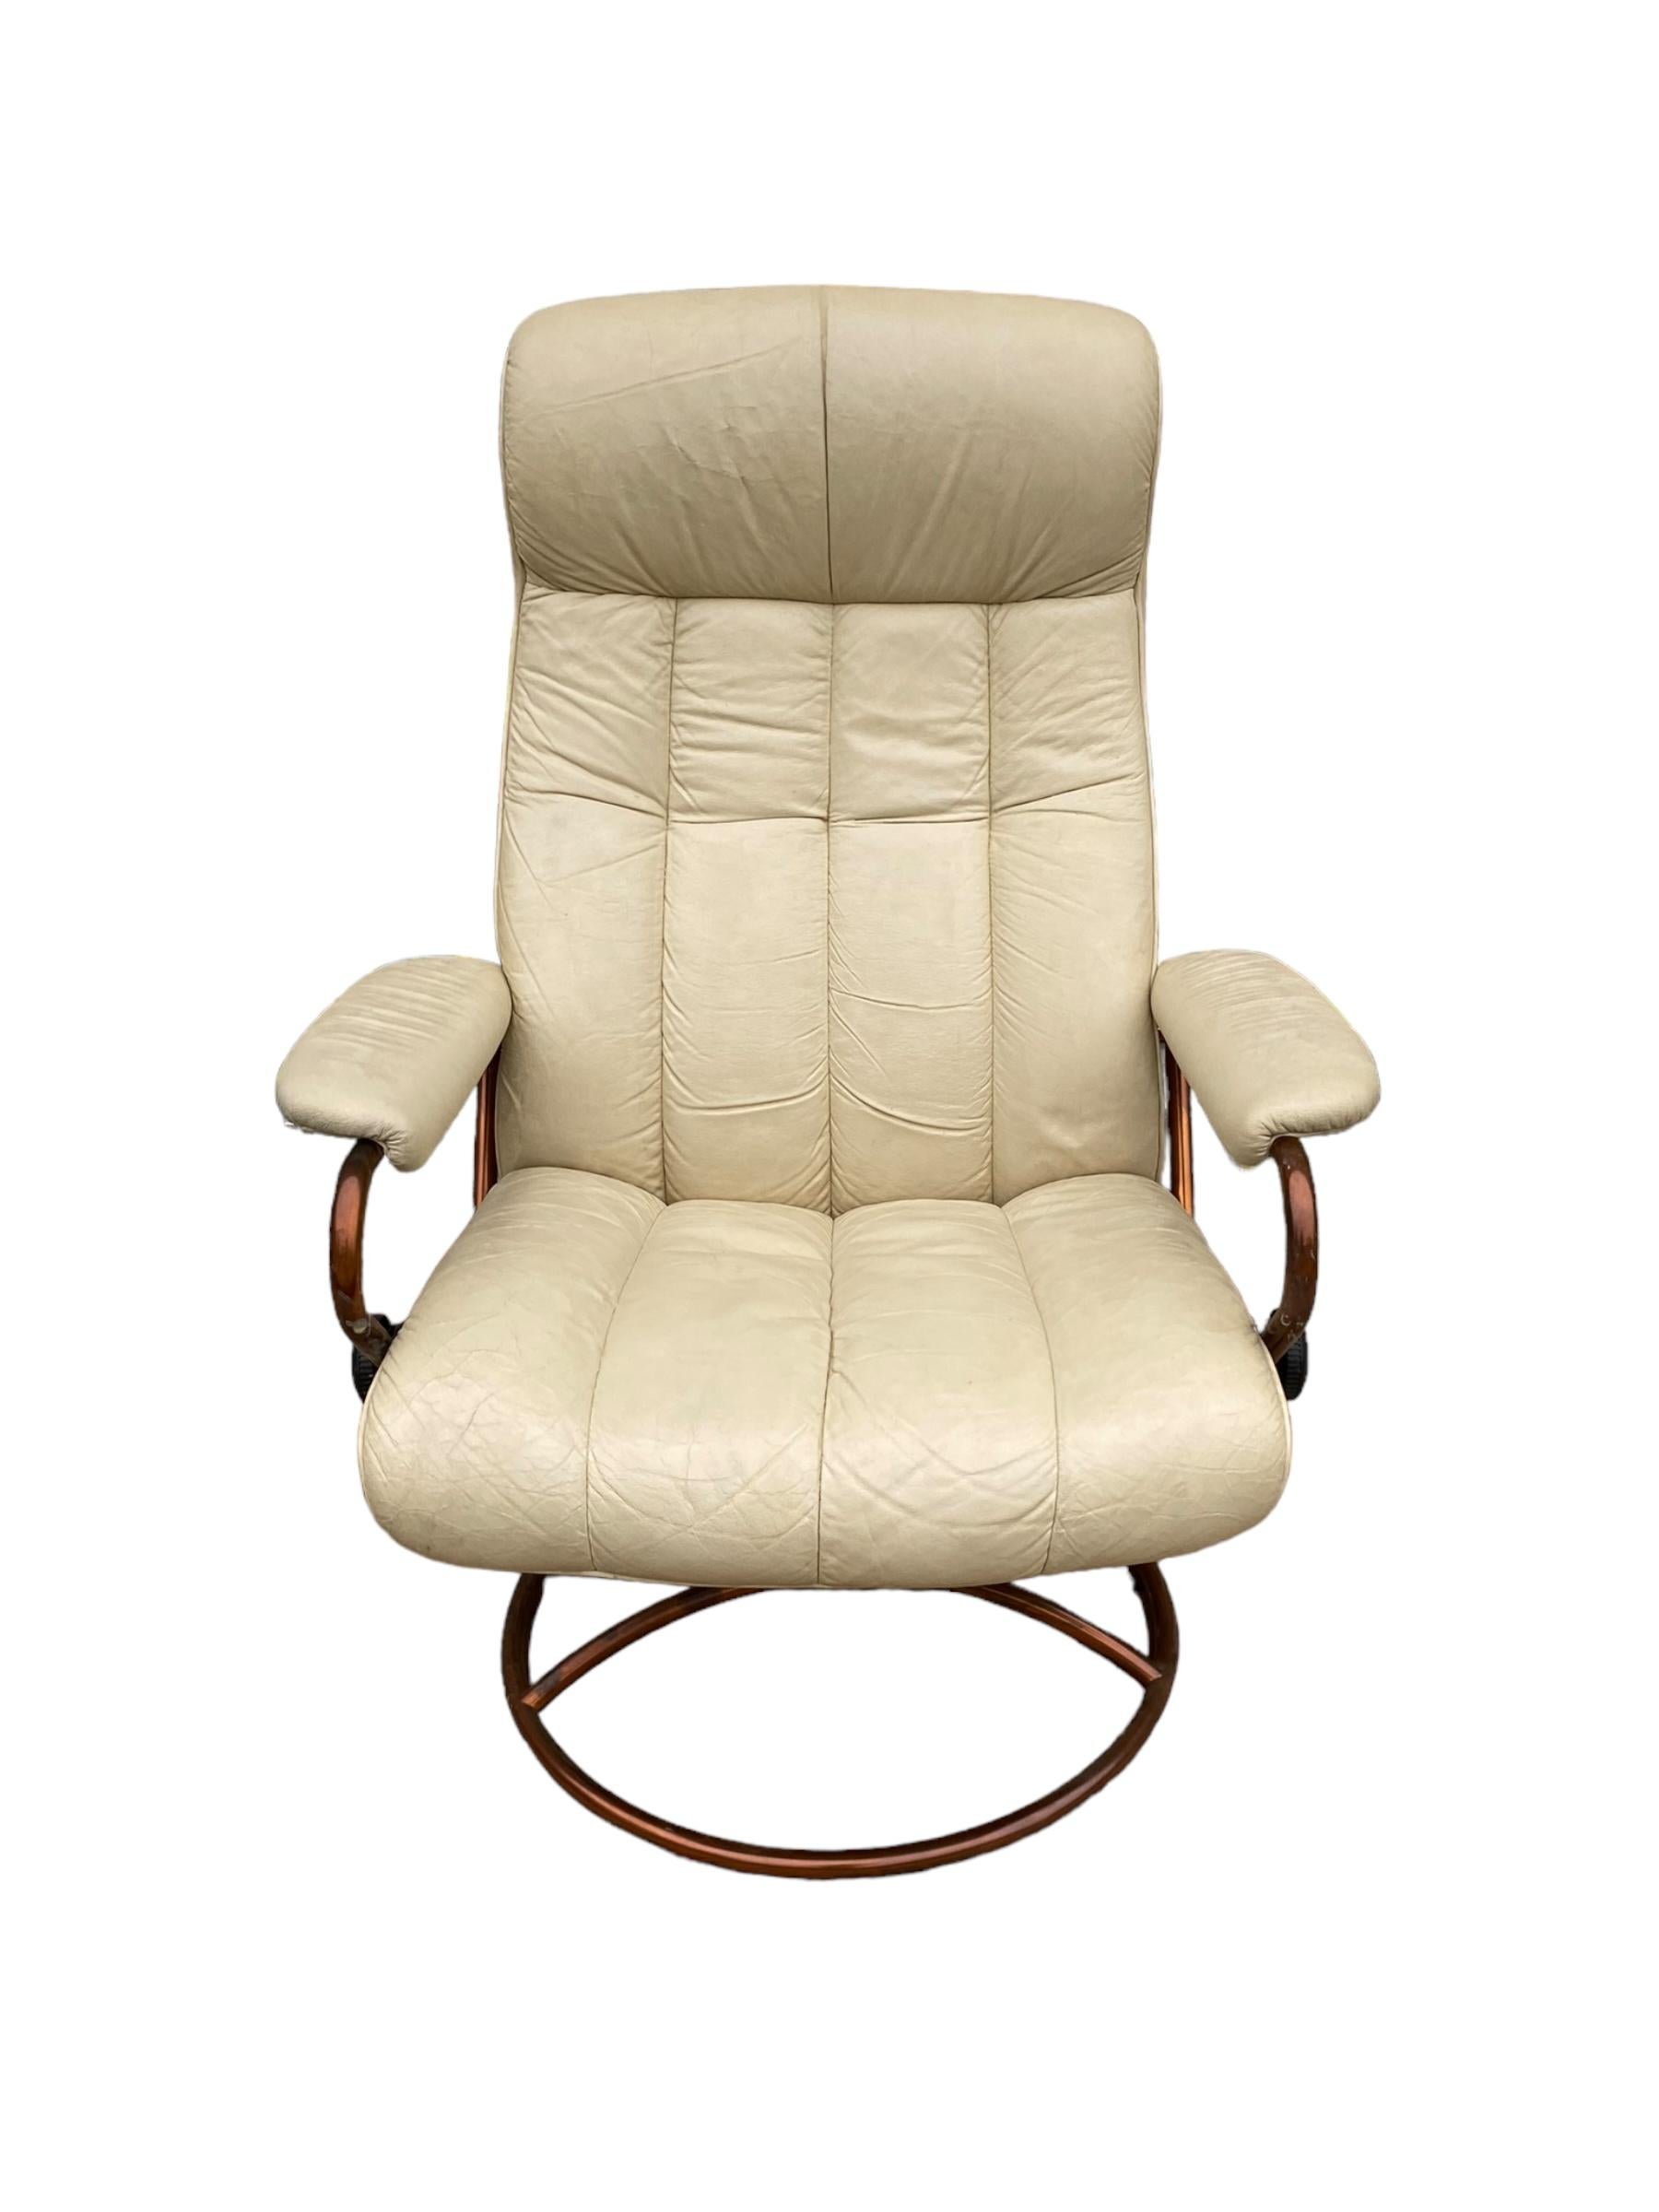 Norwegian Post Modern Stressless Lounge Chair and Ottoman with copper frame For Sale